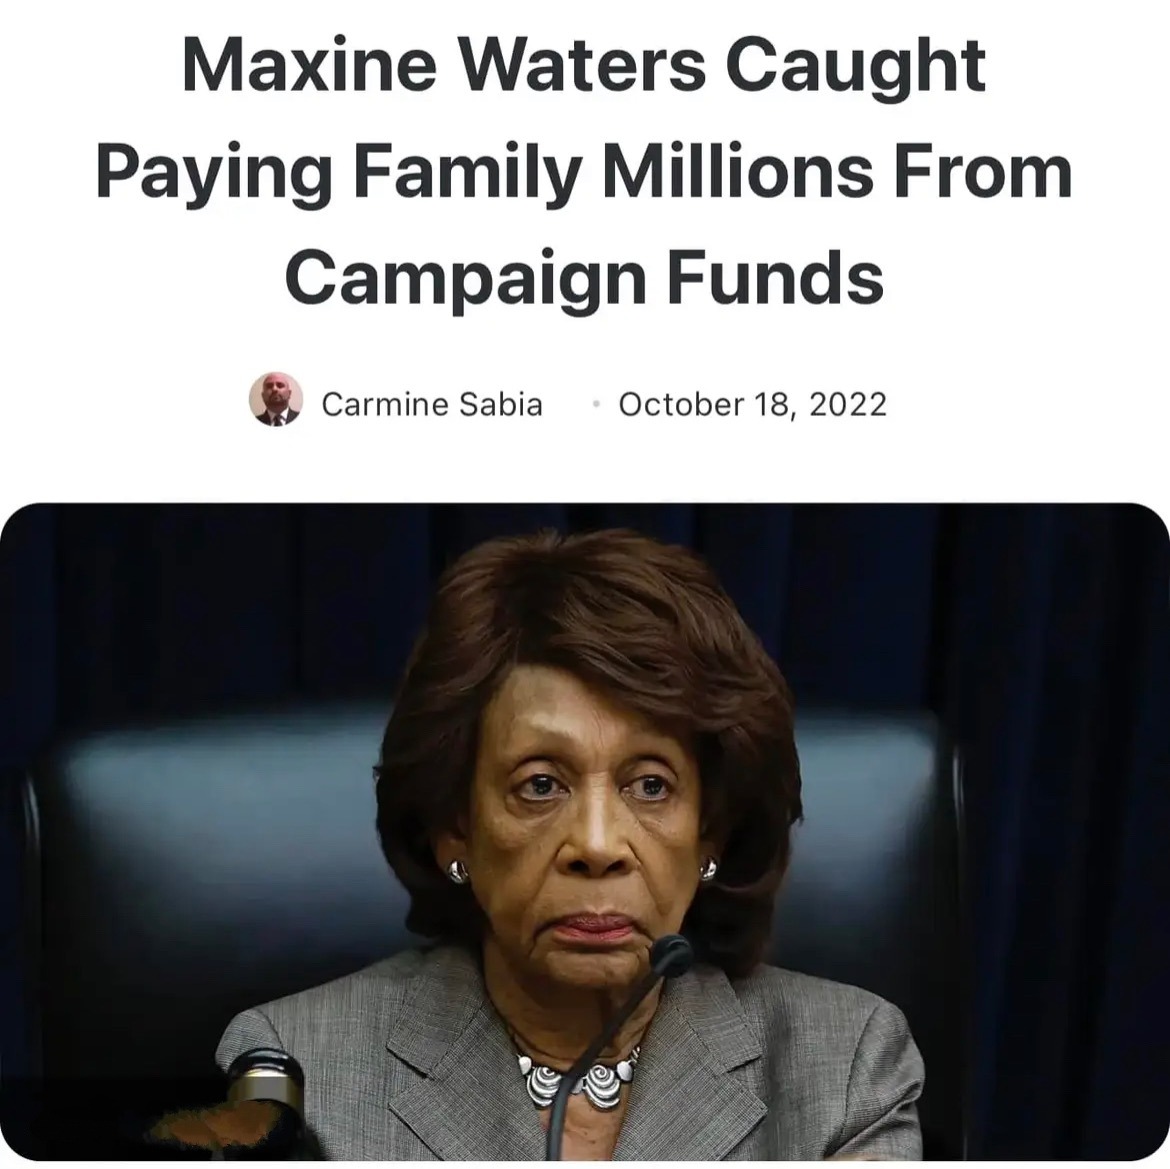 Gasoline Maxine Waters is Going to Prison! | image tagged in maxine waters,gasoline maxine,prison,sad maxine waters,triggered liberal,government corruption | made w/ Imgflip meme maker